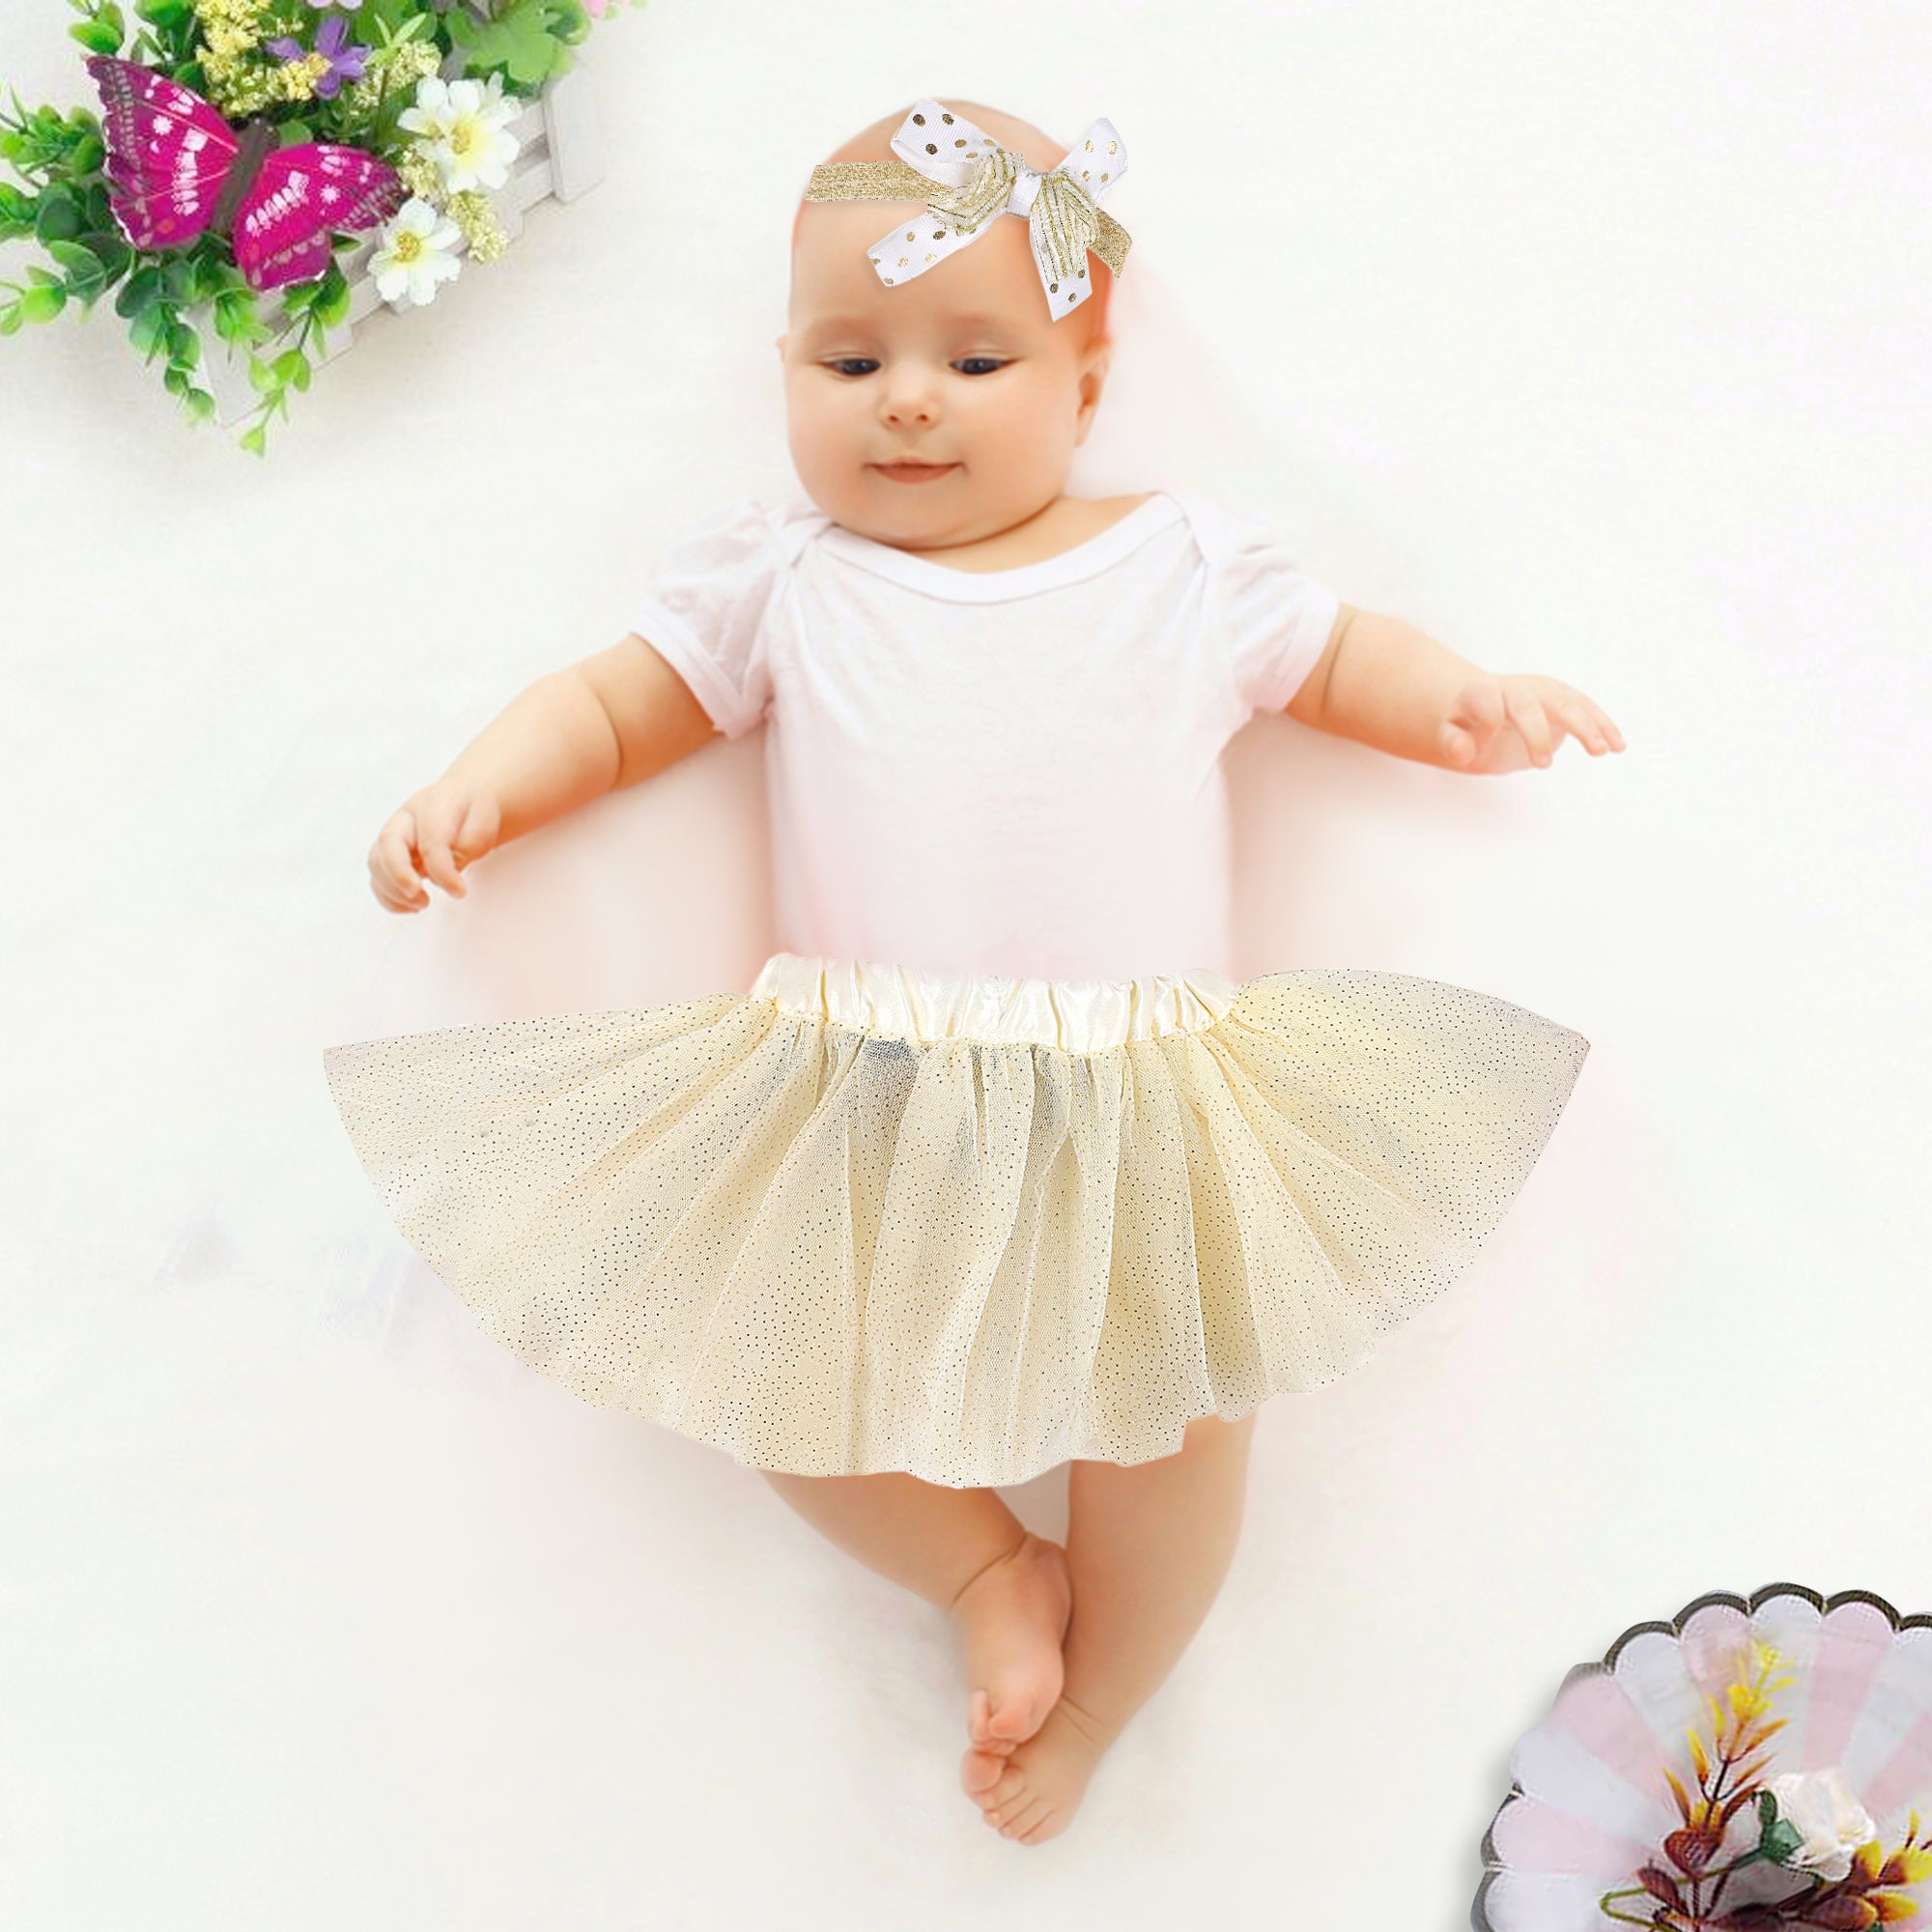 Fairy White And Golden Tutu Skirt And Accessory Set - Baby Moo